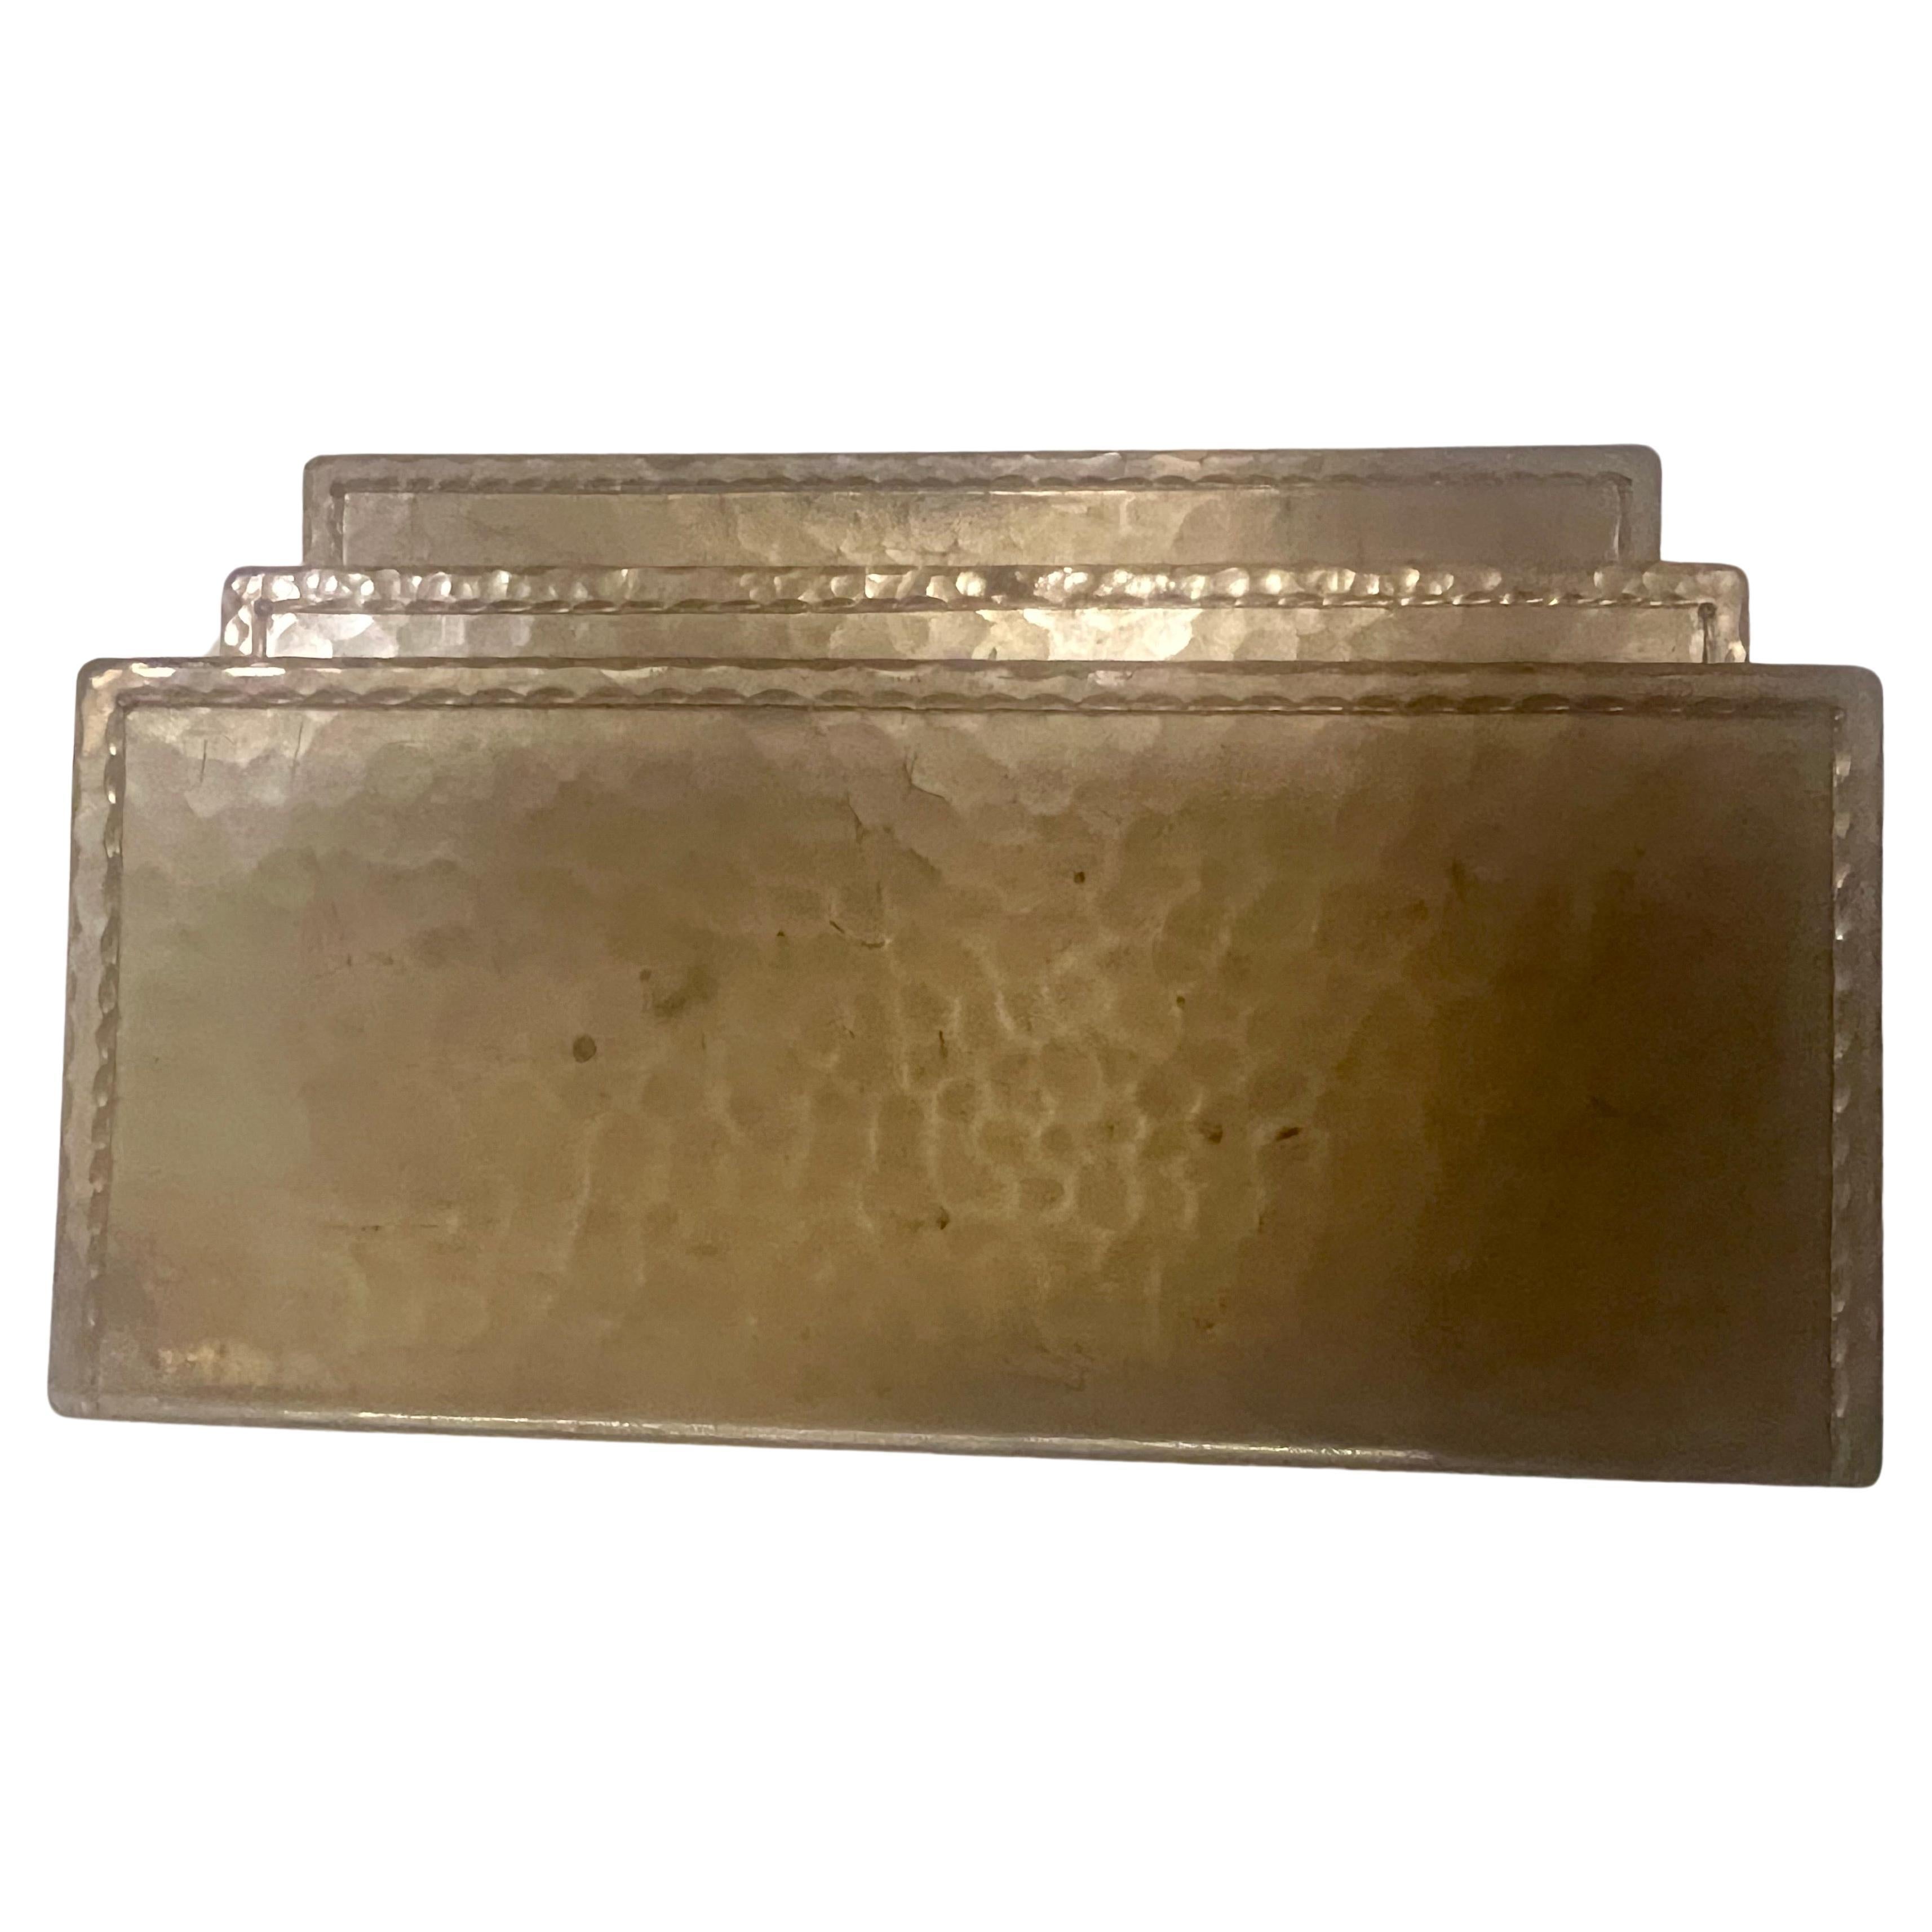 early mark hand hammered desk top envelope holder nice detail and patina rare piece from 1910, hard to find item.